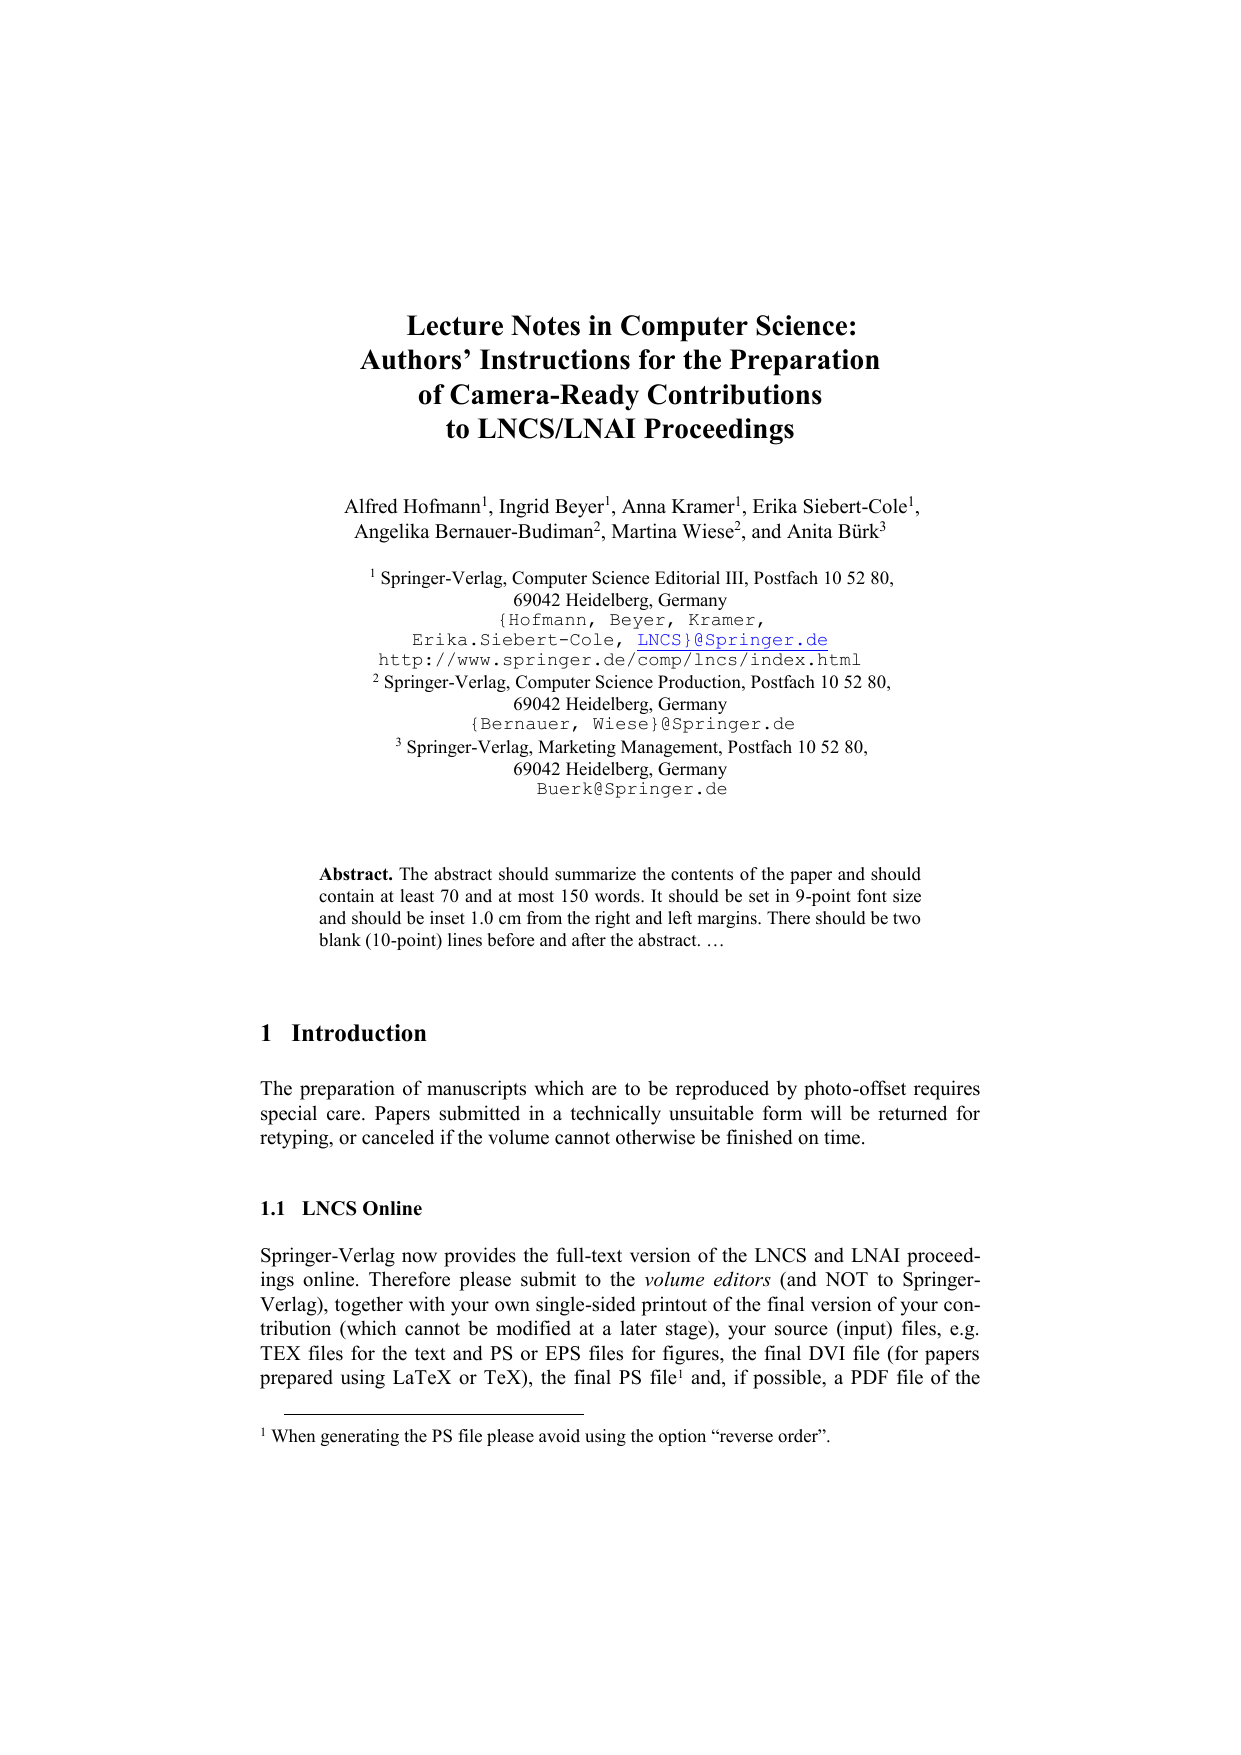 Lecture Notes In Computer Science Latex Template